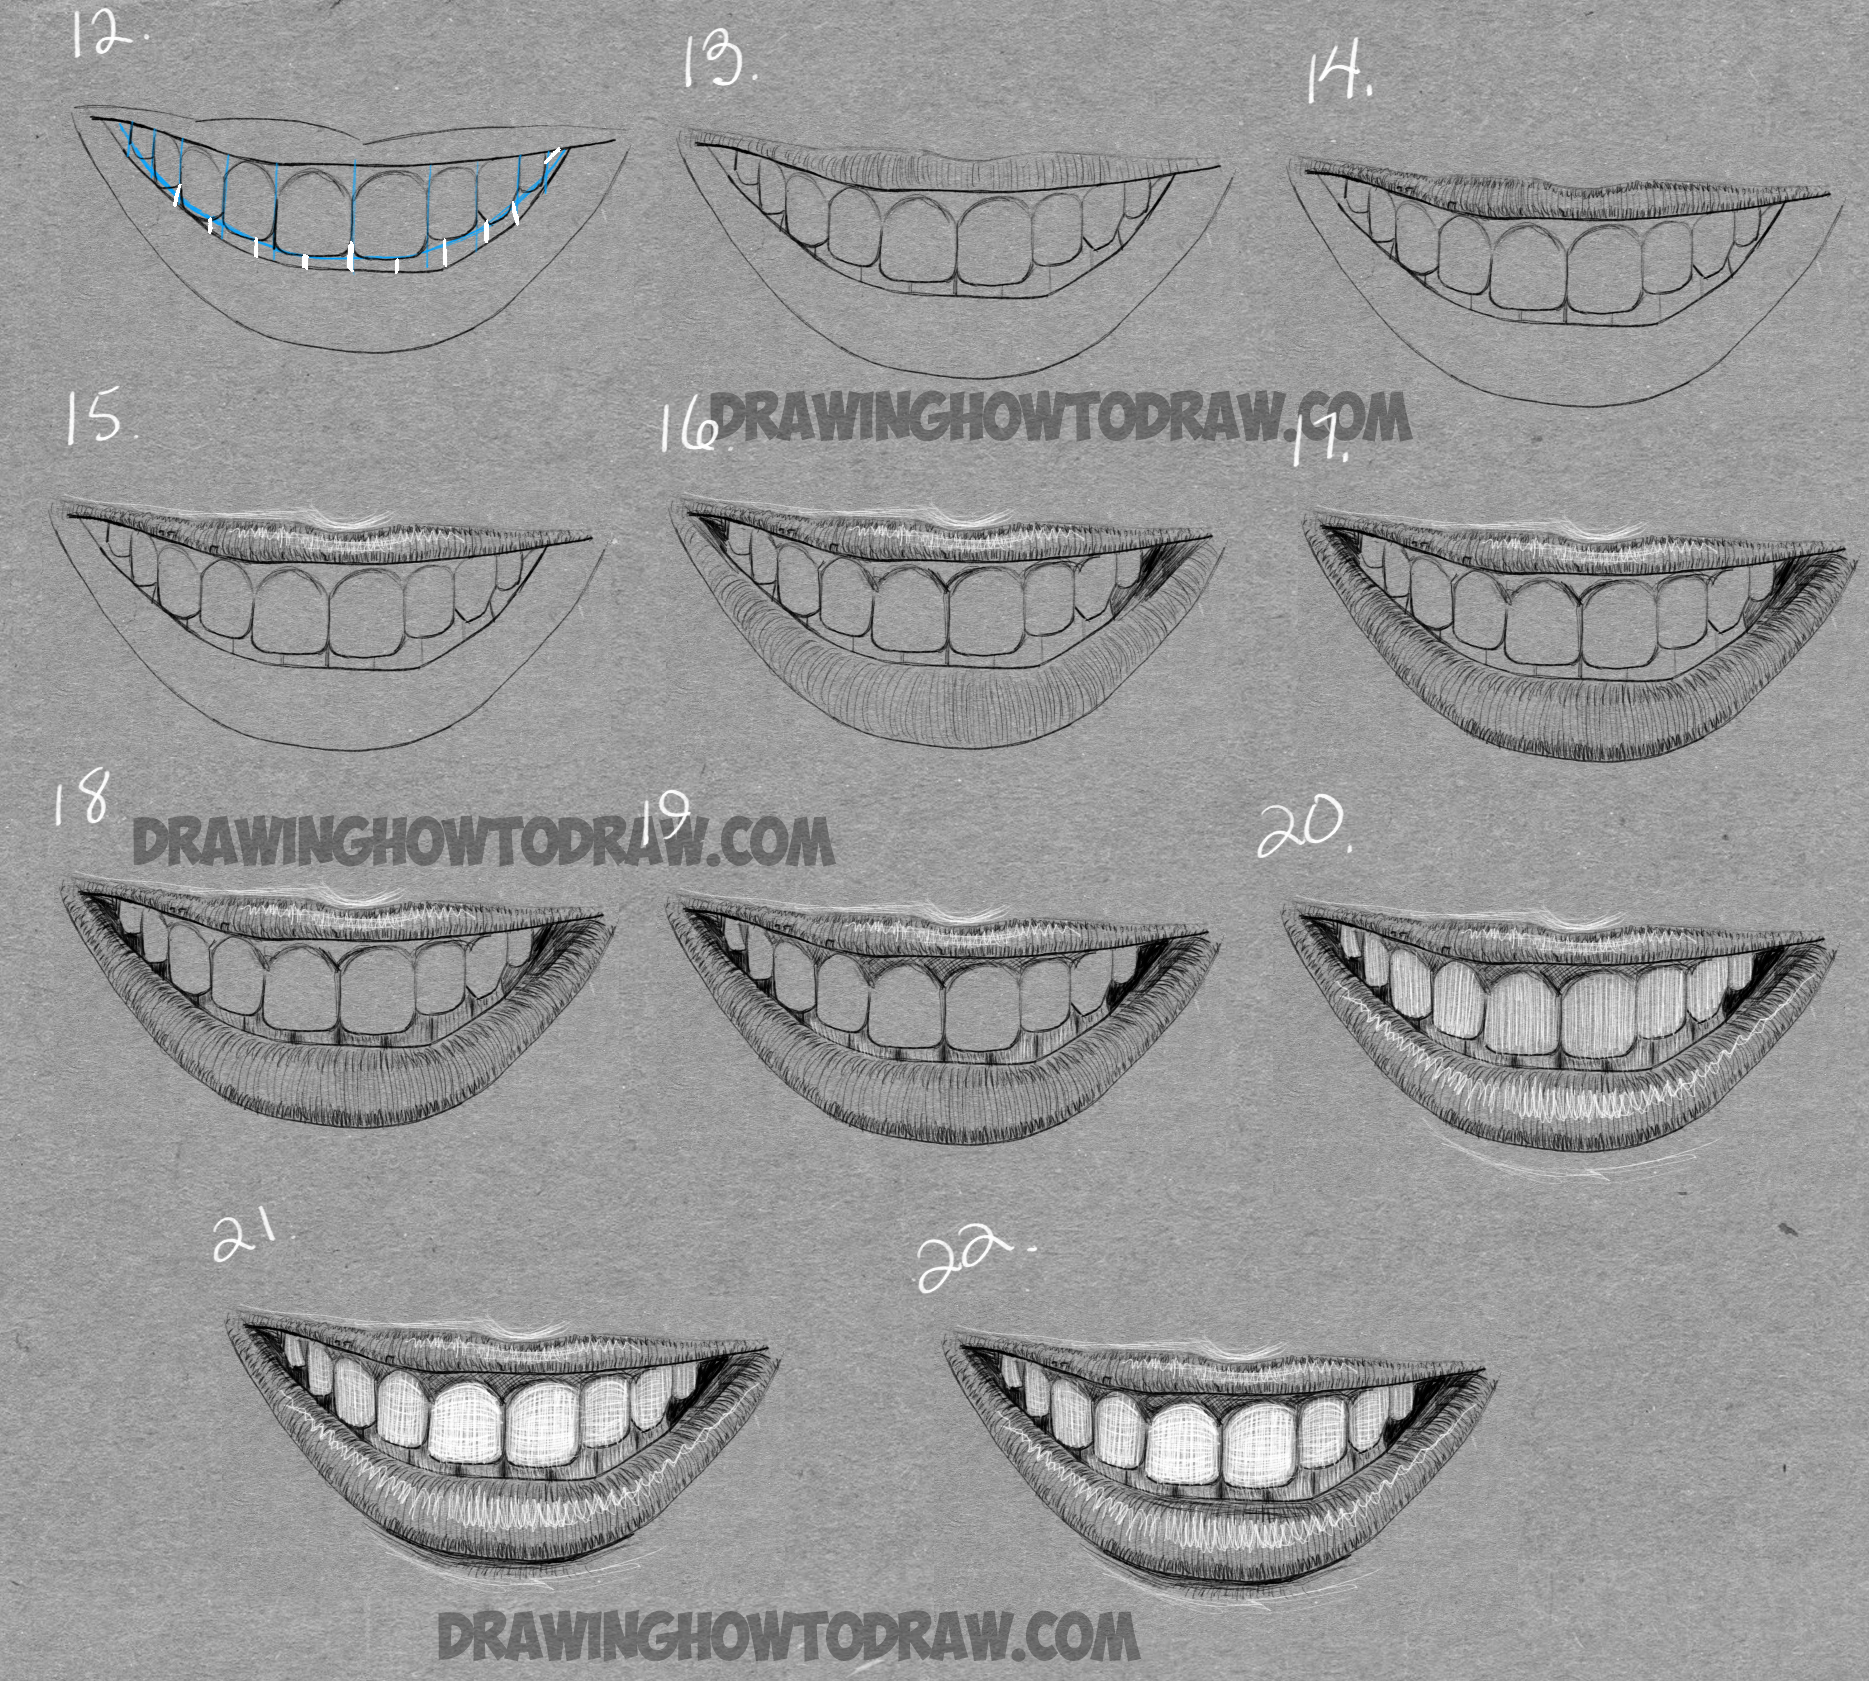 How To Draw A Mouth Full Of Teeth Drawing A Smiling Mouth And Teeth Step By Step Drawing Tutorial How To Draw Step By Step Drawing Tutorials